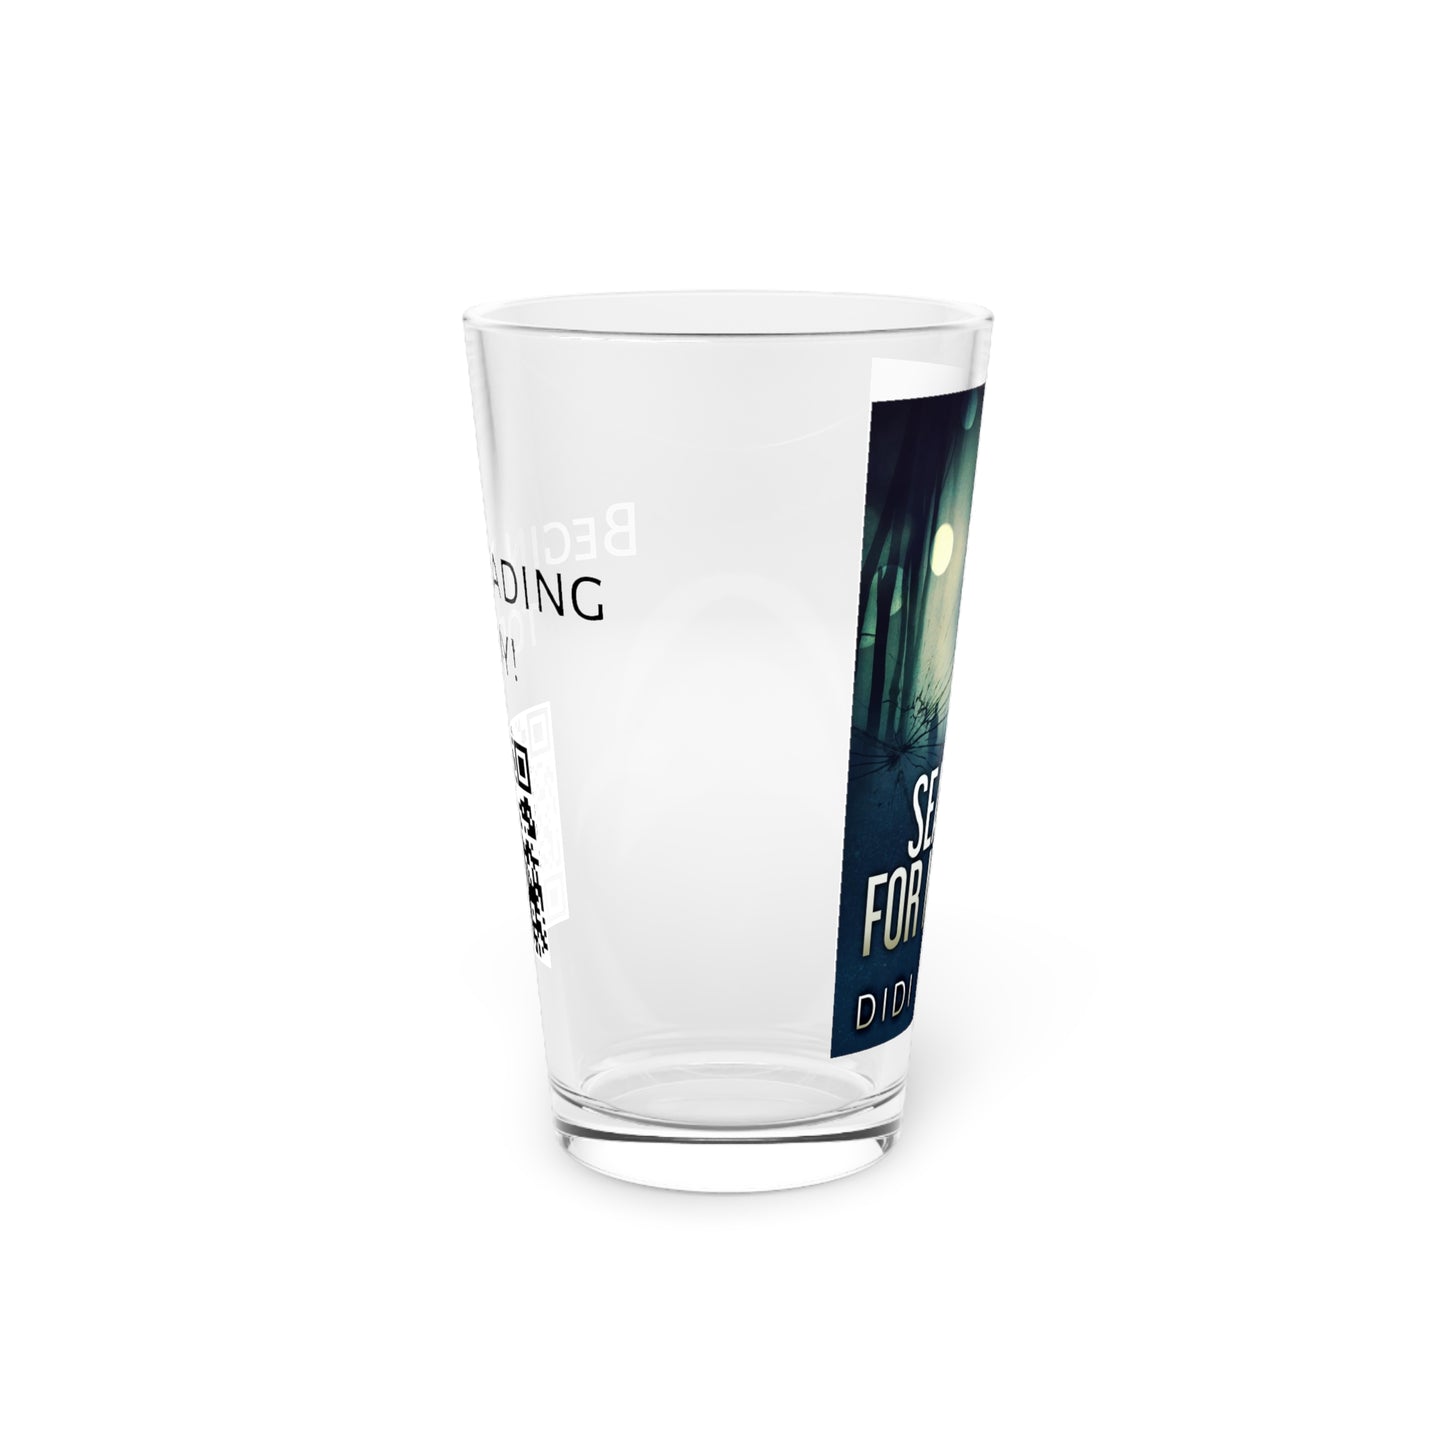 Search for Maylee - Pint Glass